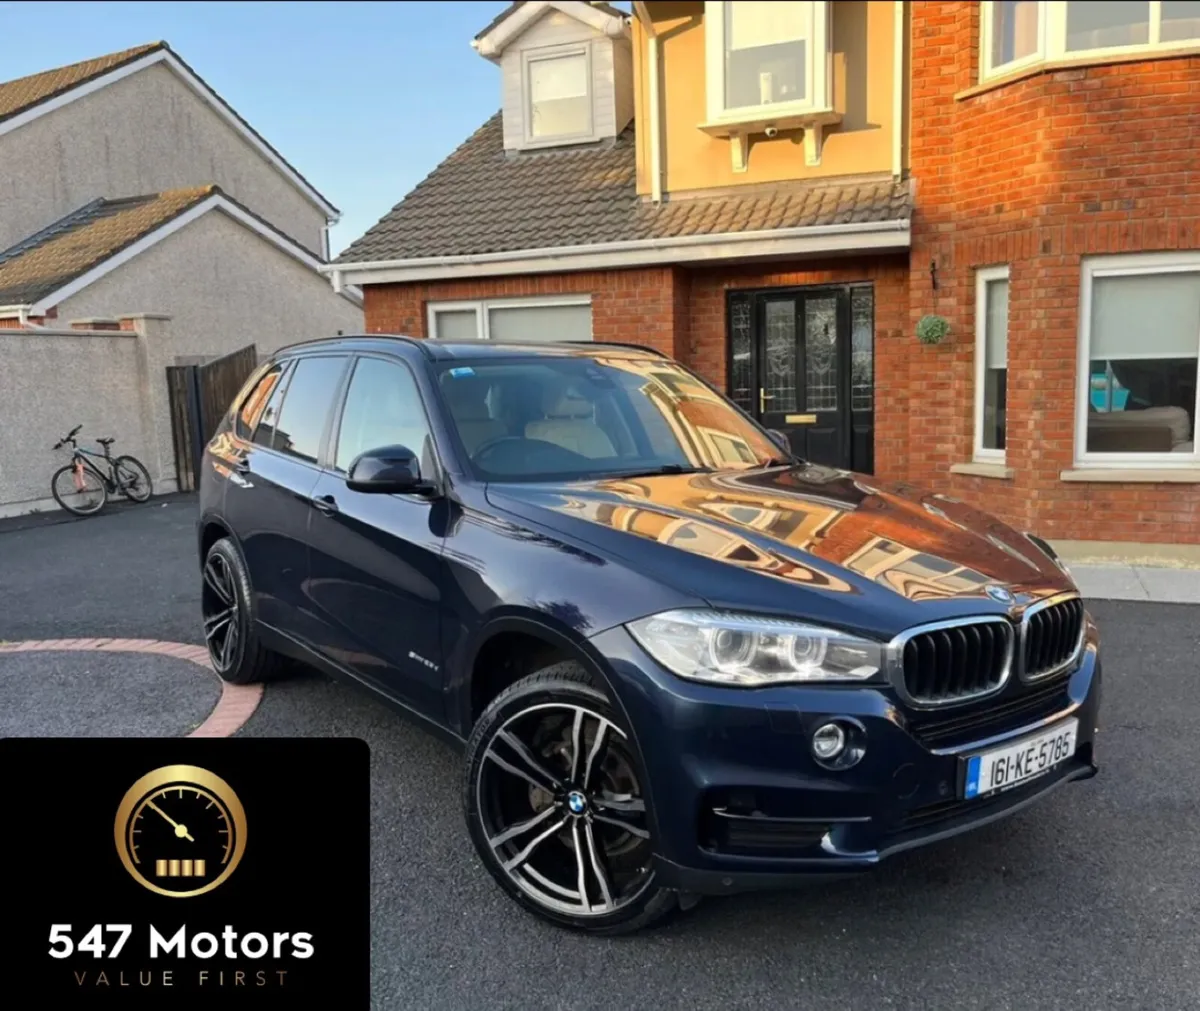 BMW X5 2016 7 Seater 25d New NCT - Image 1